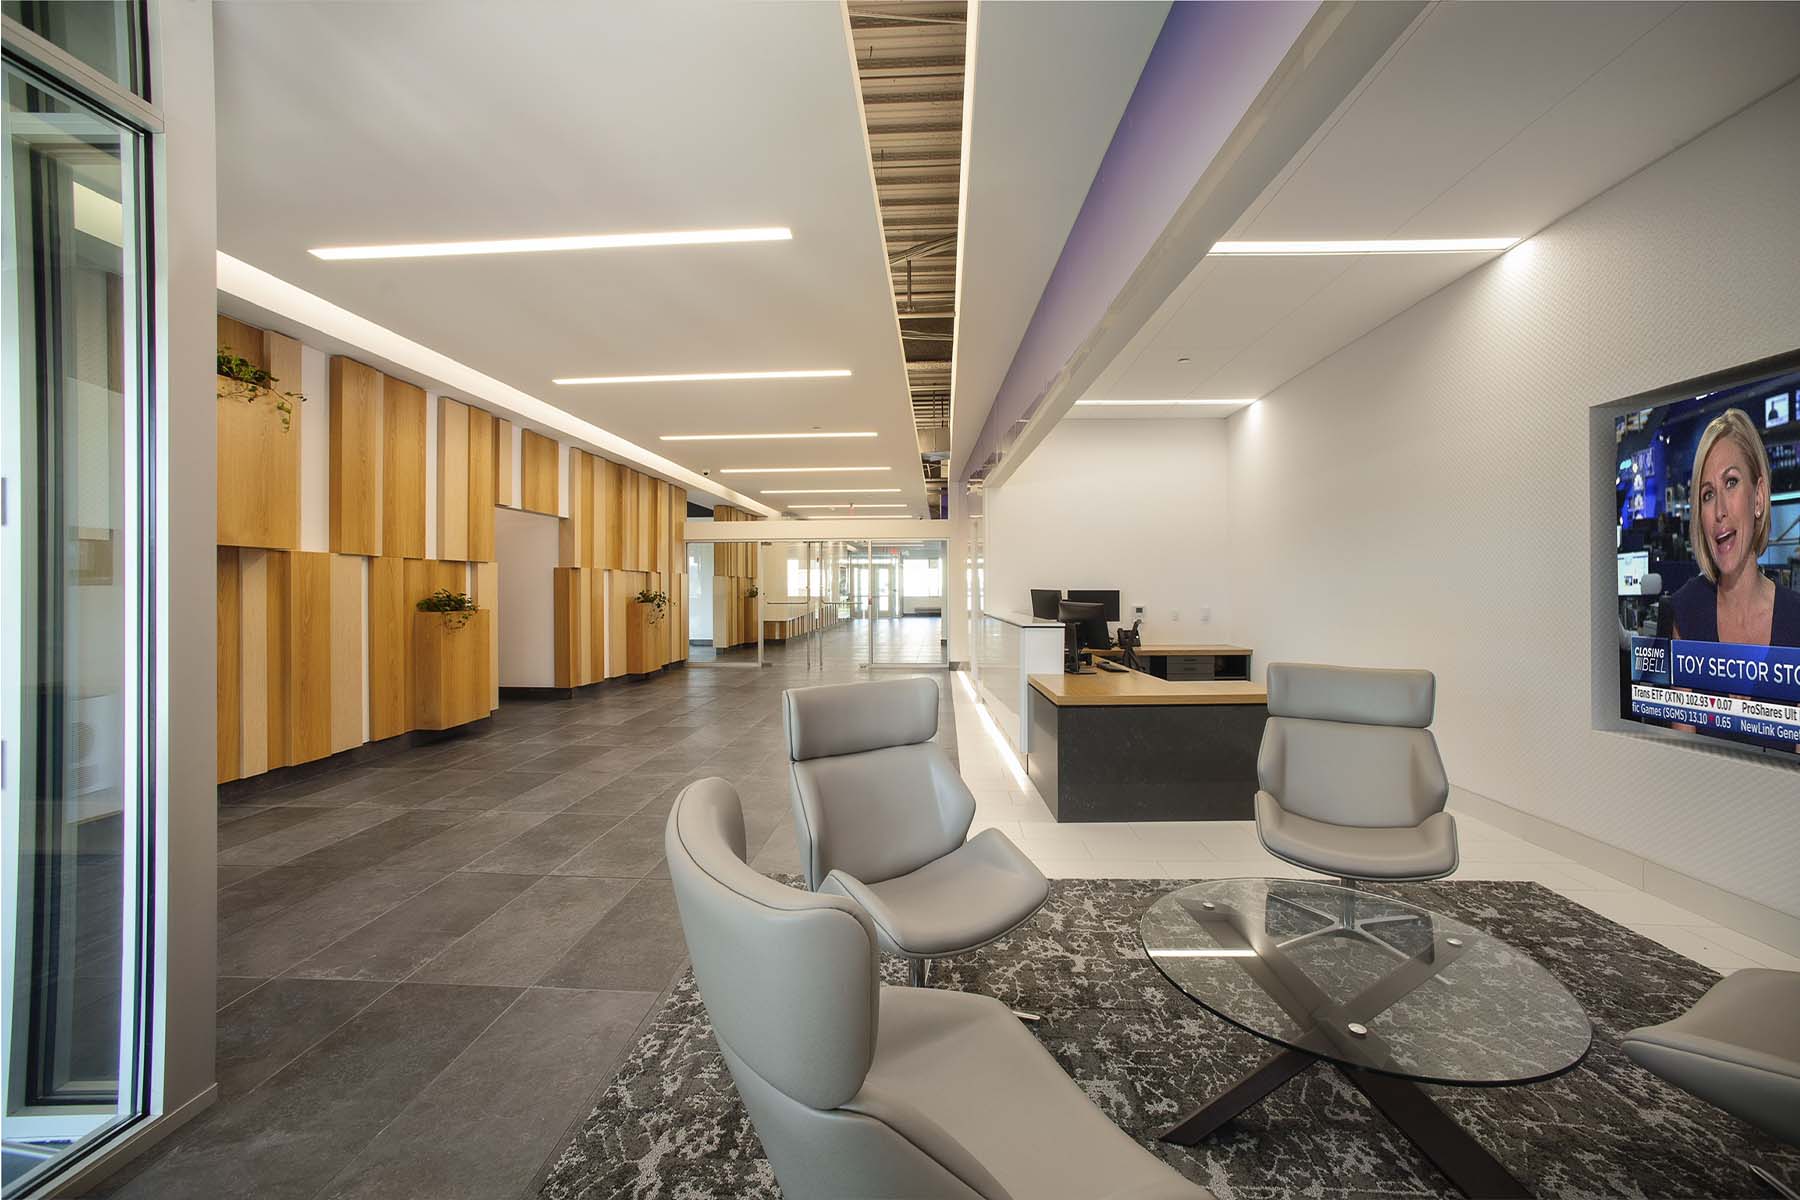 Entrance and lobby area with modern gray chairs, and walls with wood finishes